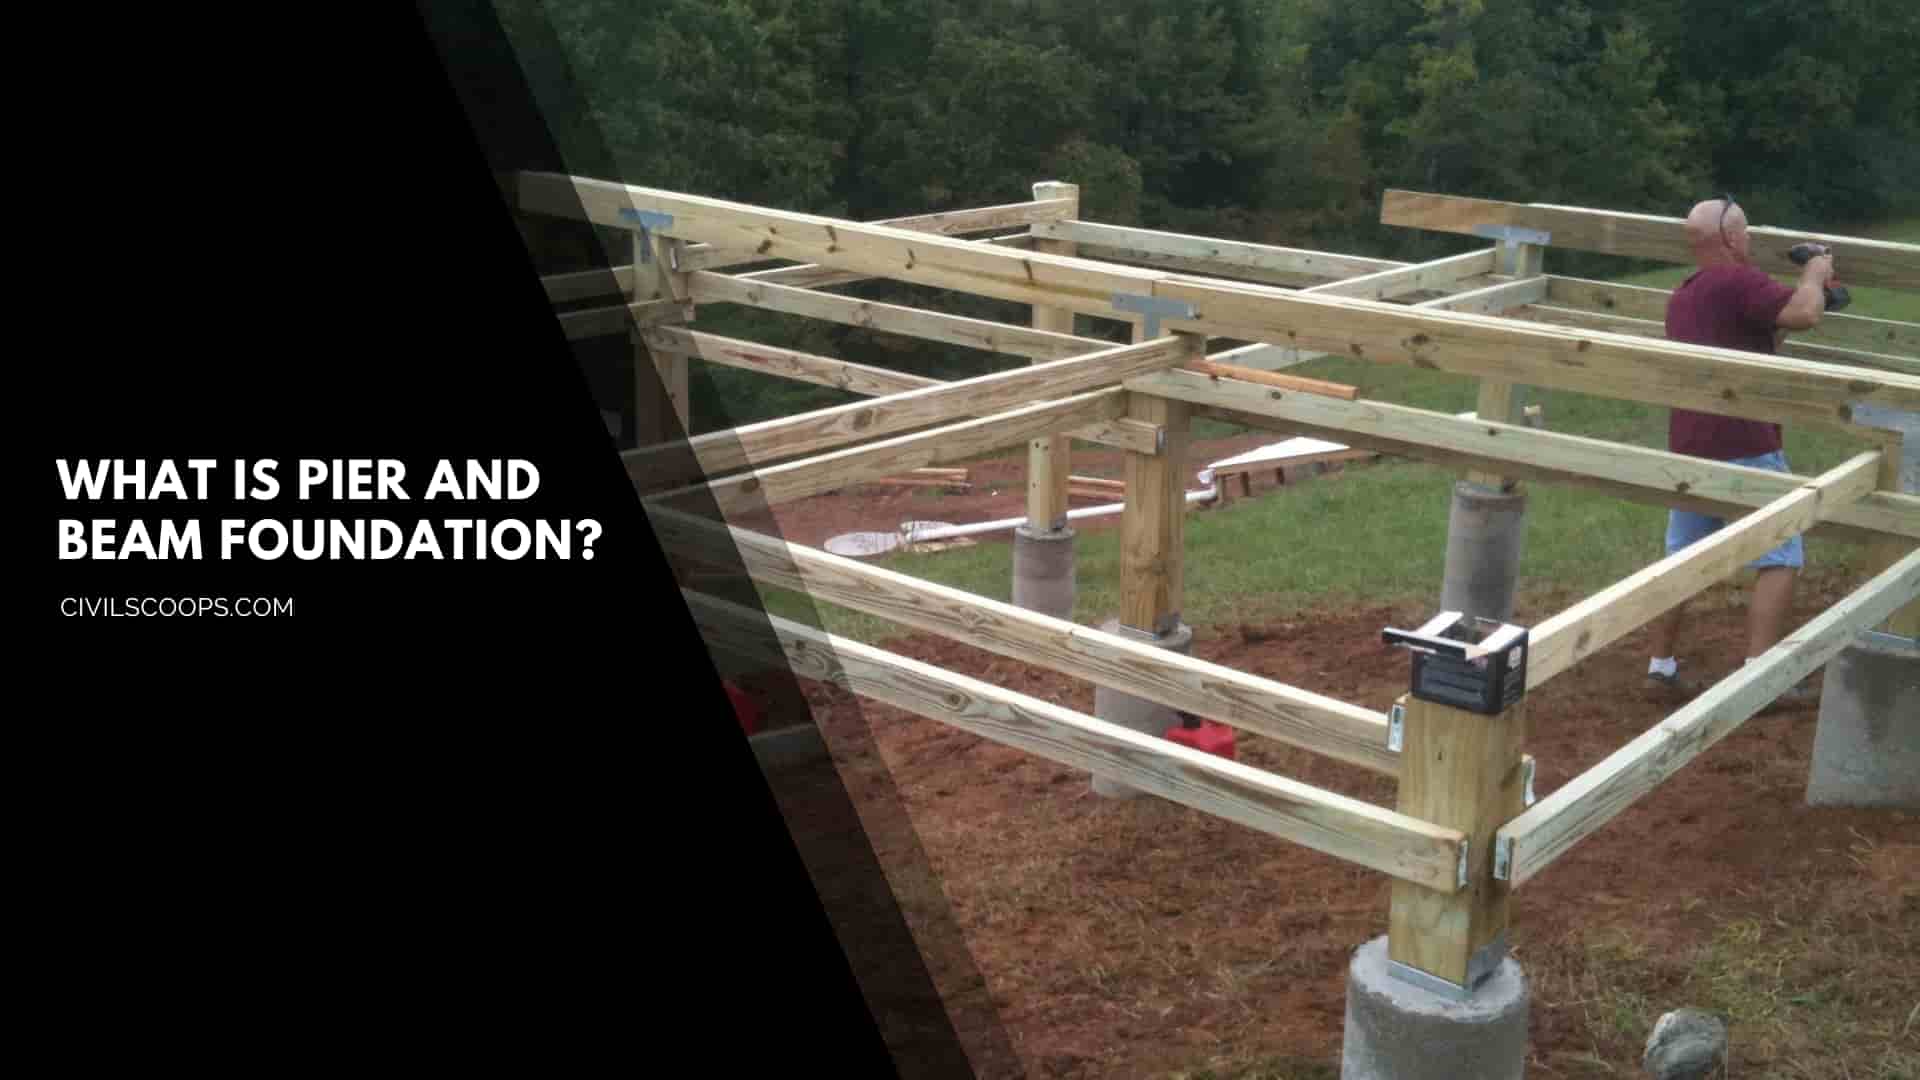 What Is Pier and Beam Foundation?